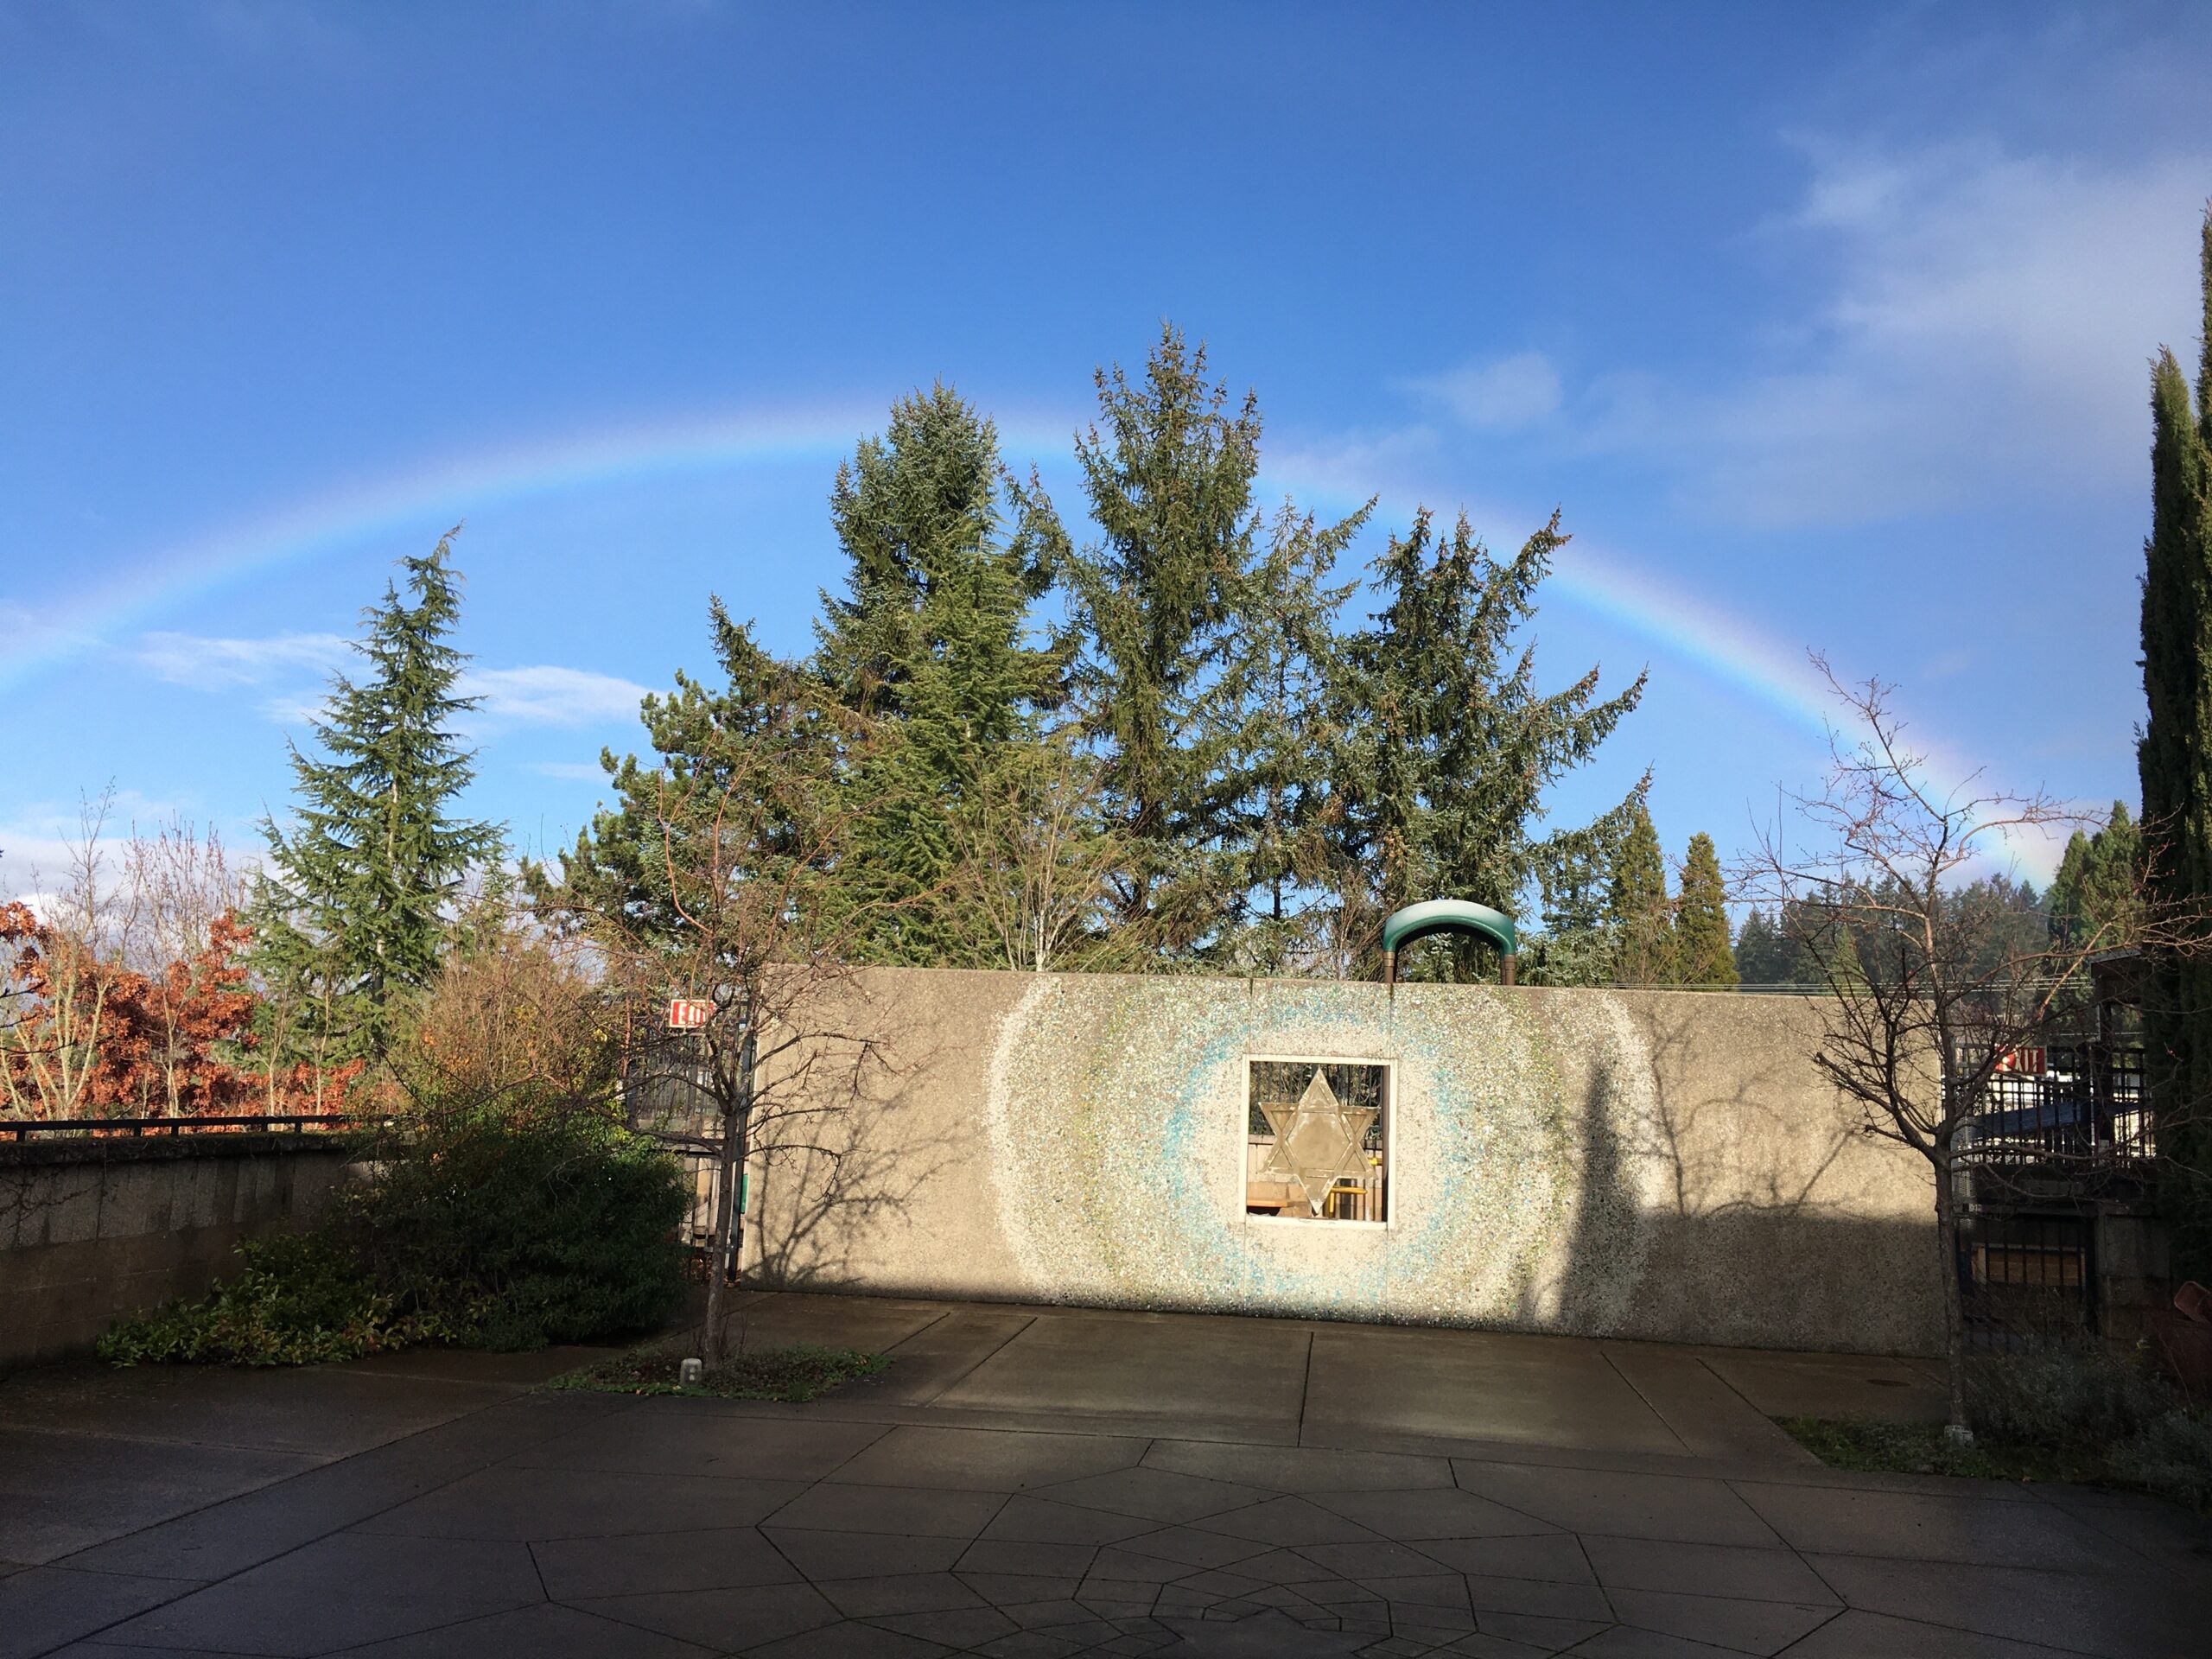 A rainbow is seen in the sky over a driveway.